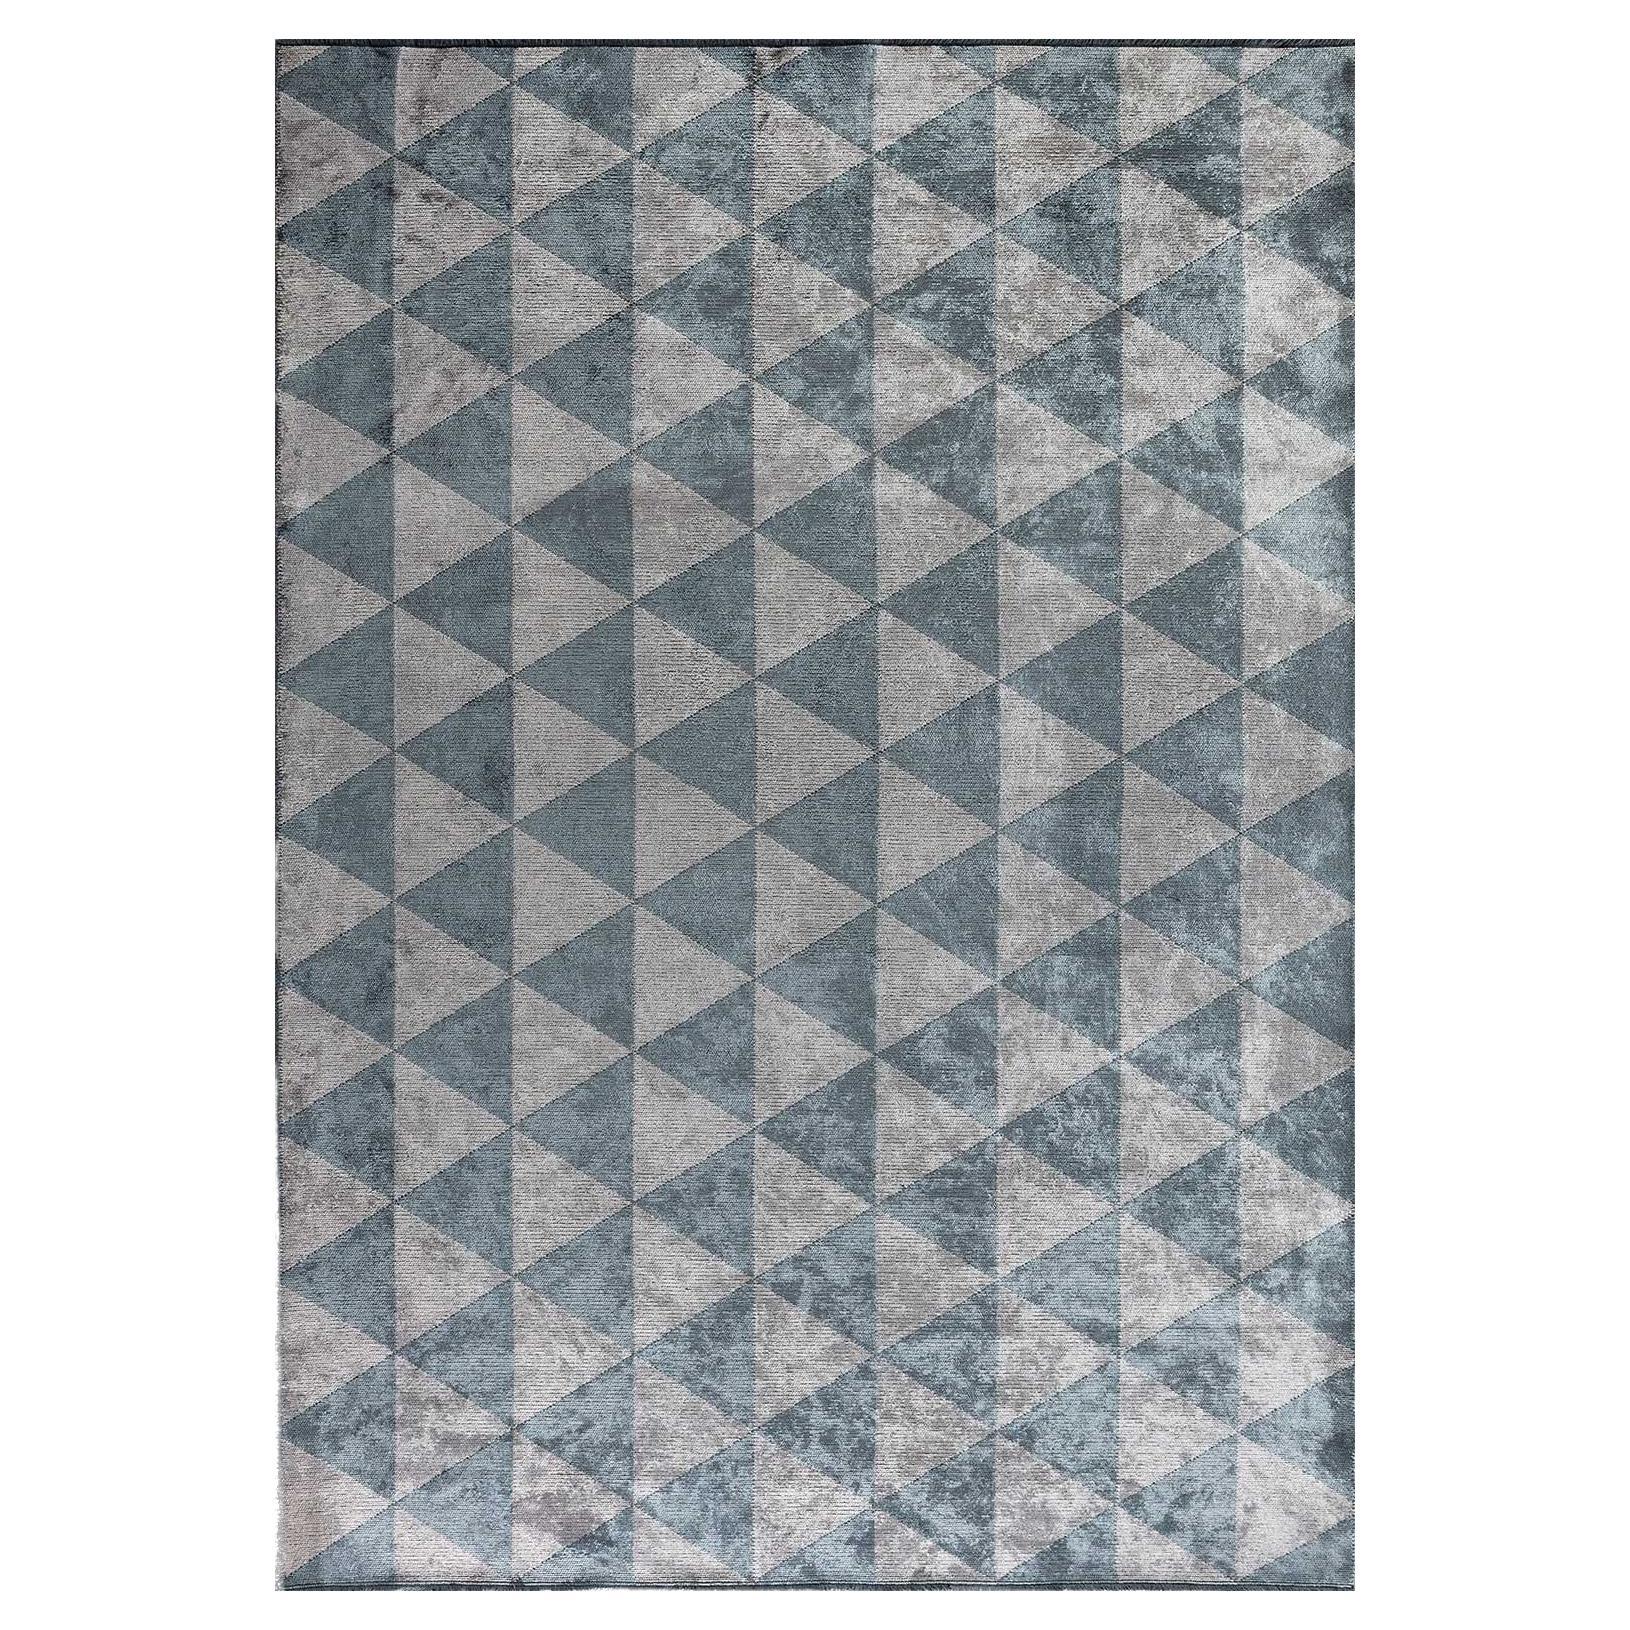 Silver Gray and Light Blue and Triangle Diamond Geometric Pattern Rug with Shine